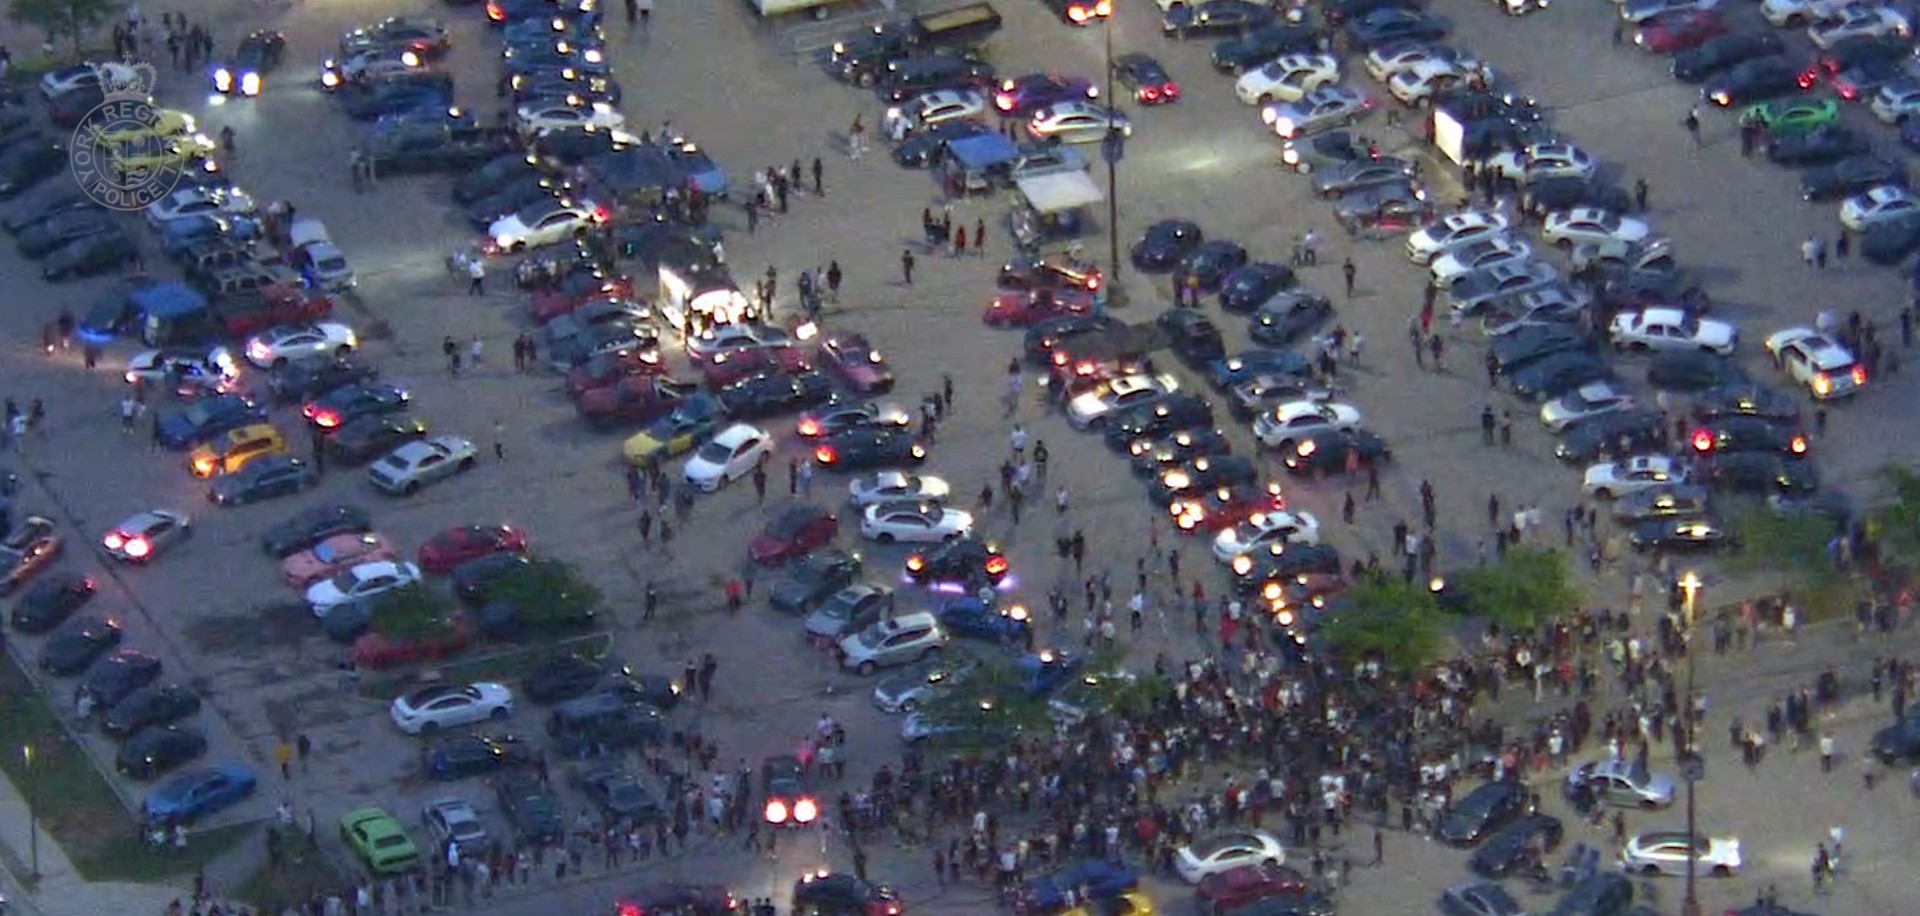 Helicopter footage shows an unauthorized car rally